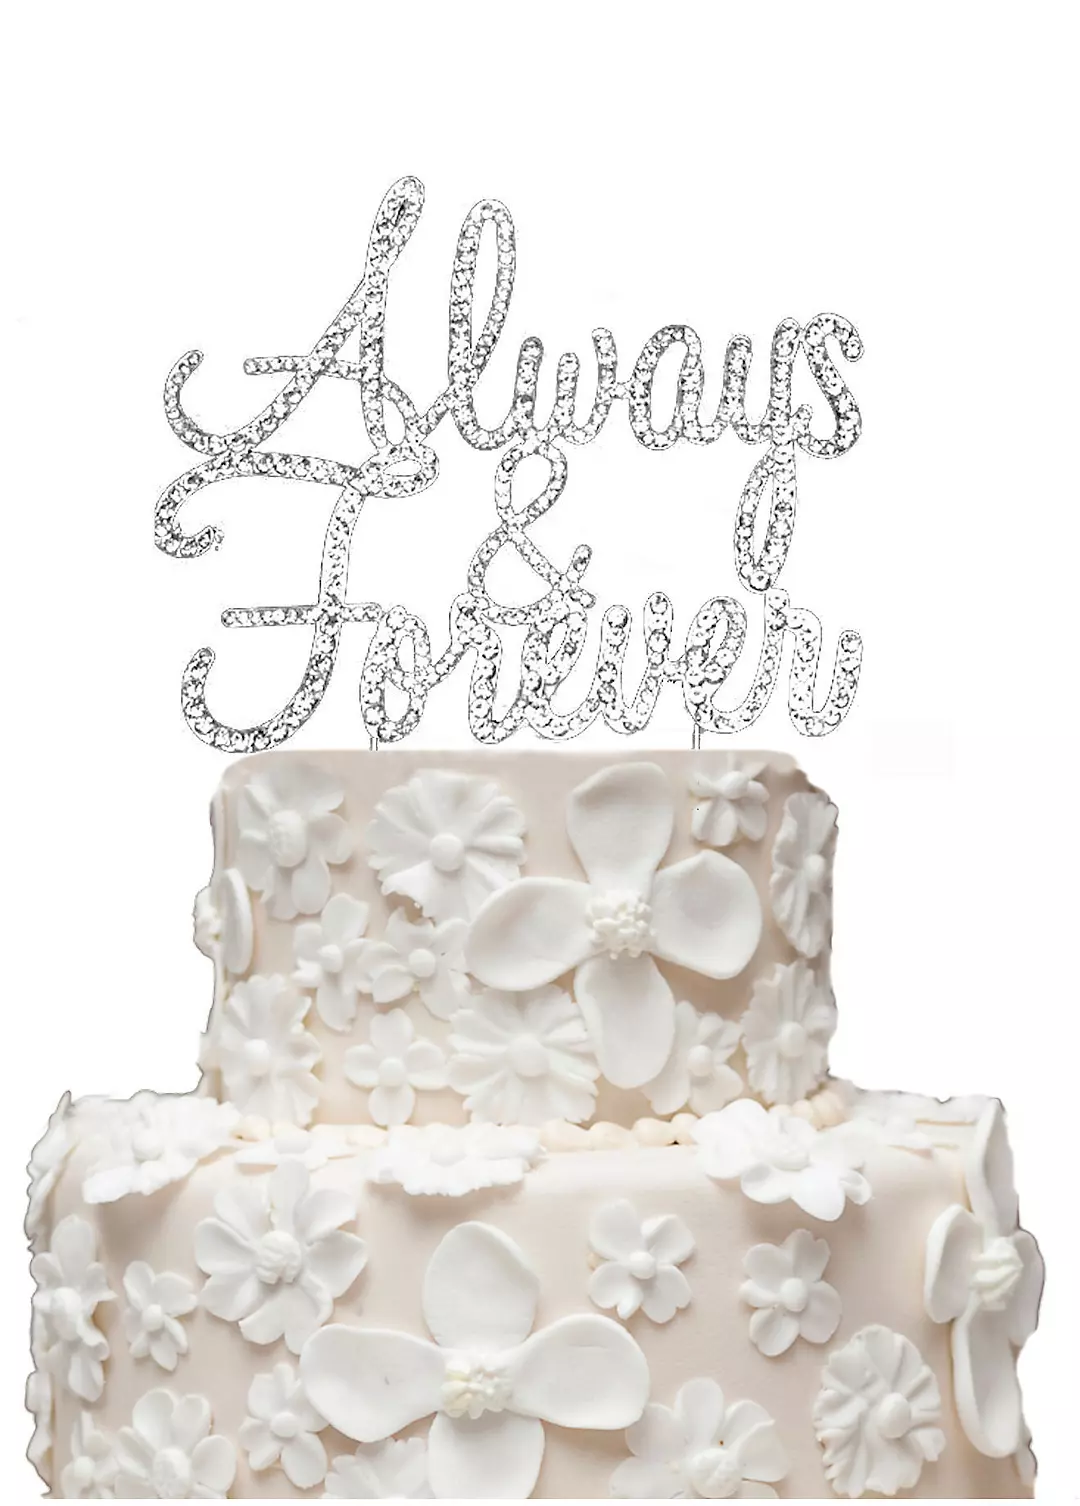 Rhinestone Always and Forever Cake Topper Image